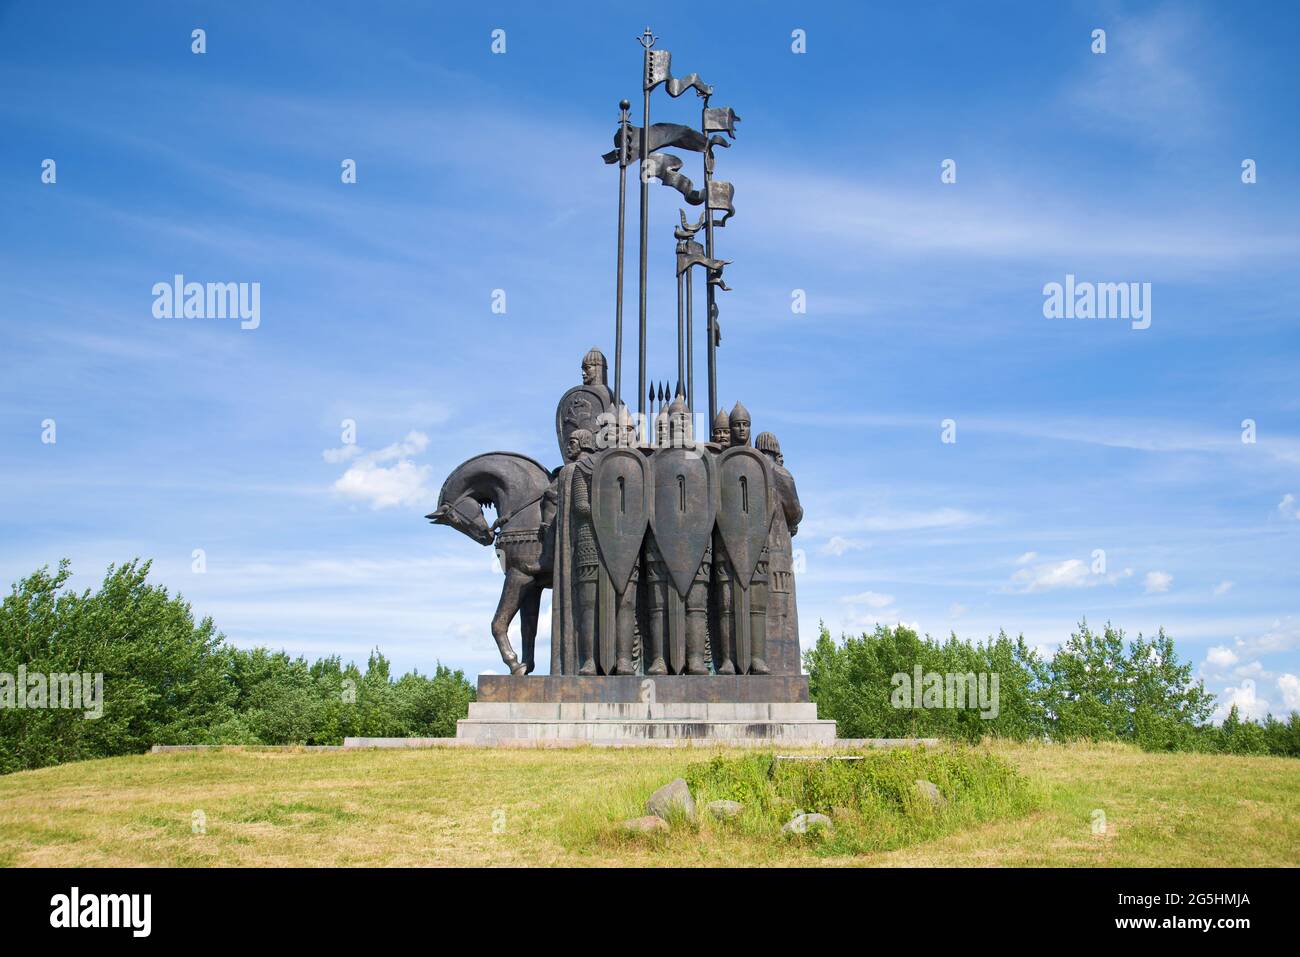 PSKOV, RUSSIA - JUNE 11, 2018: Monumet 'Battle on the ice' on the Mount Sokolikha in the sunny June afternoon Stock Photo